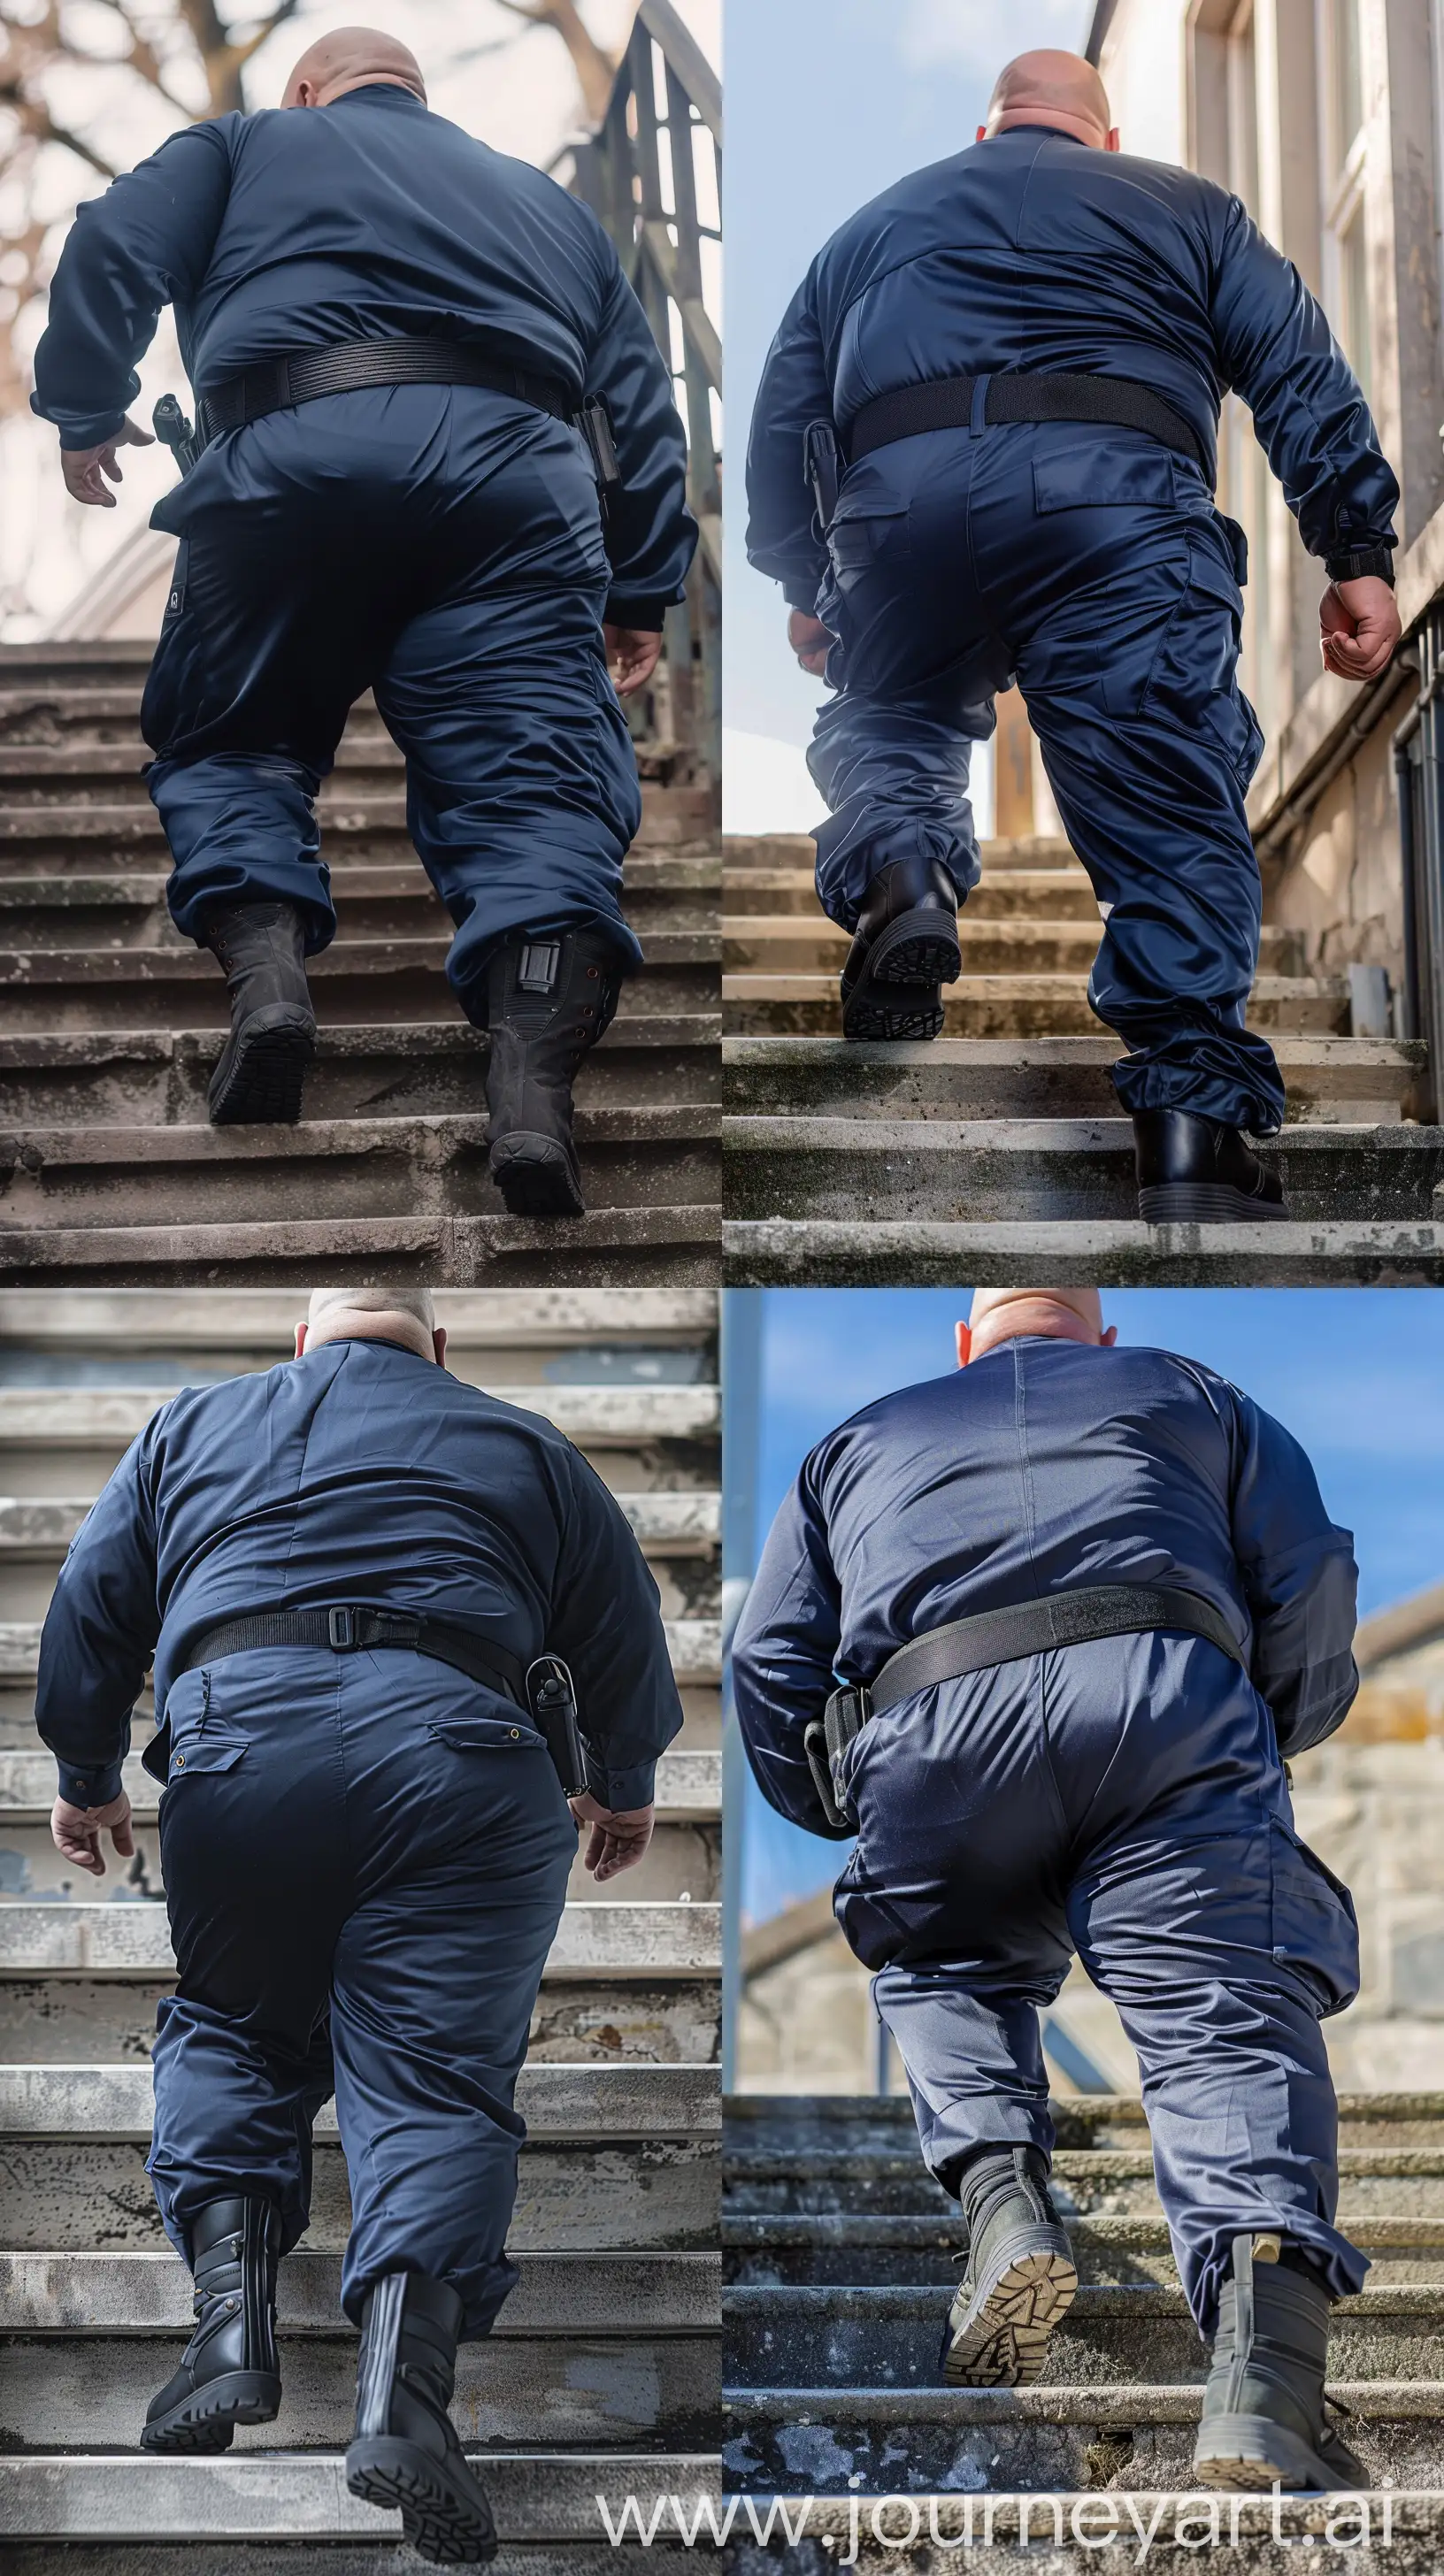 Elderly-Security-Guard-Climbing-Stairs-in-Navy-Coverall-and-Tactical-Boots